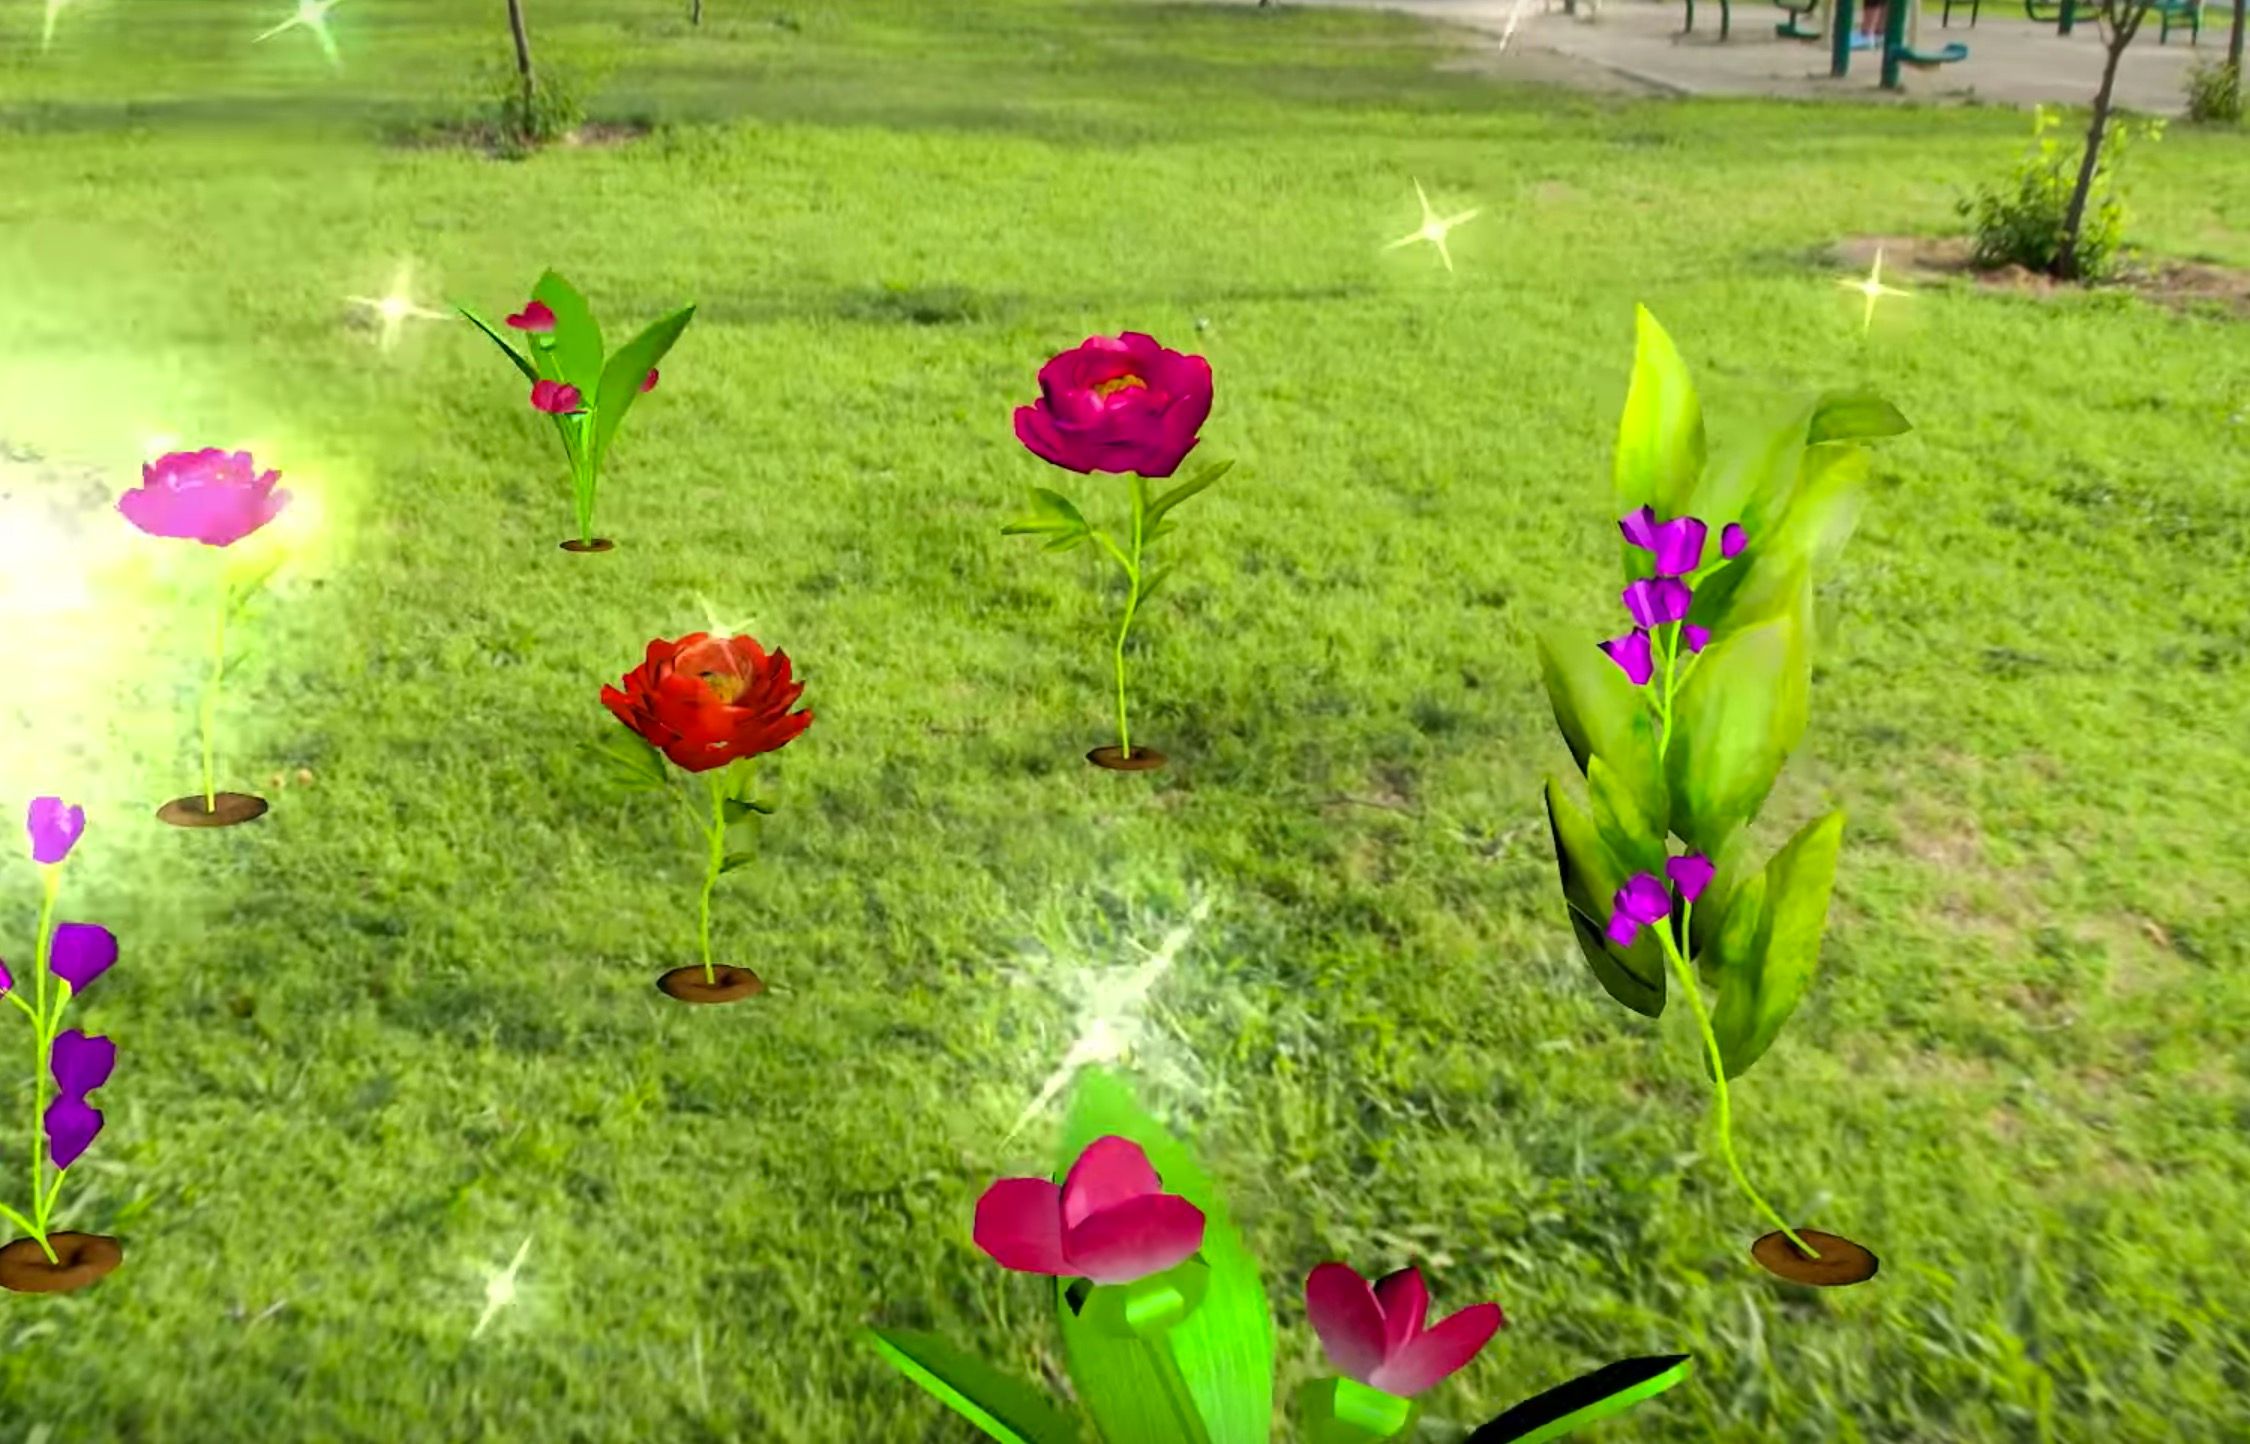 snapchat just added 3d world lenses see how they look and work here image 2